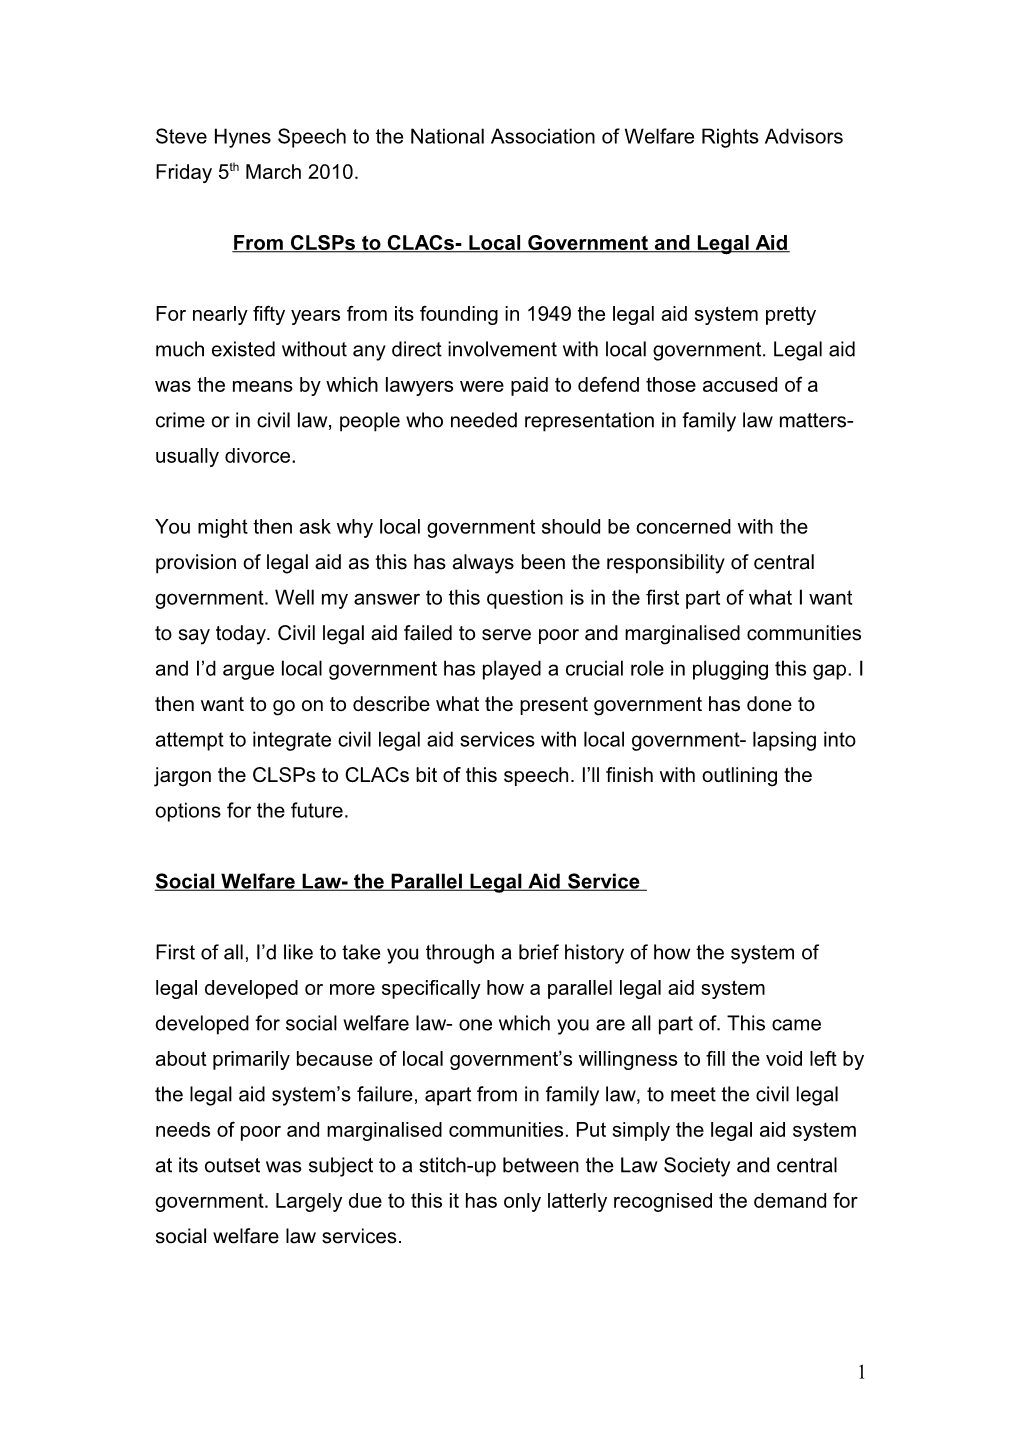 From Clsps to Clacs- Local Government and Legal Aid